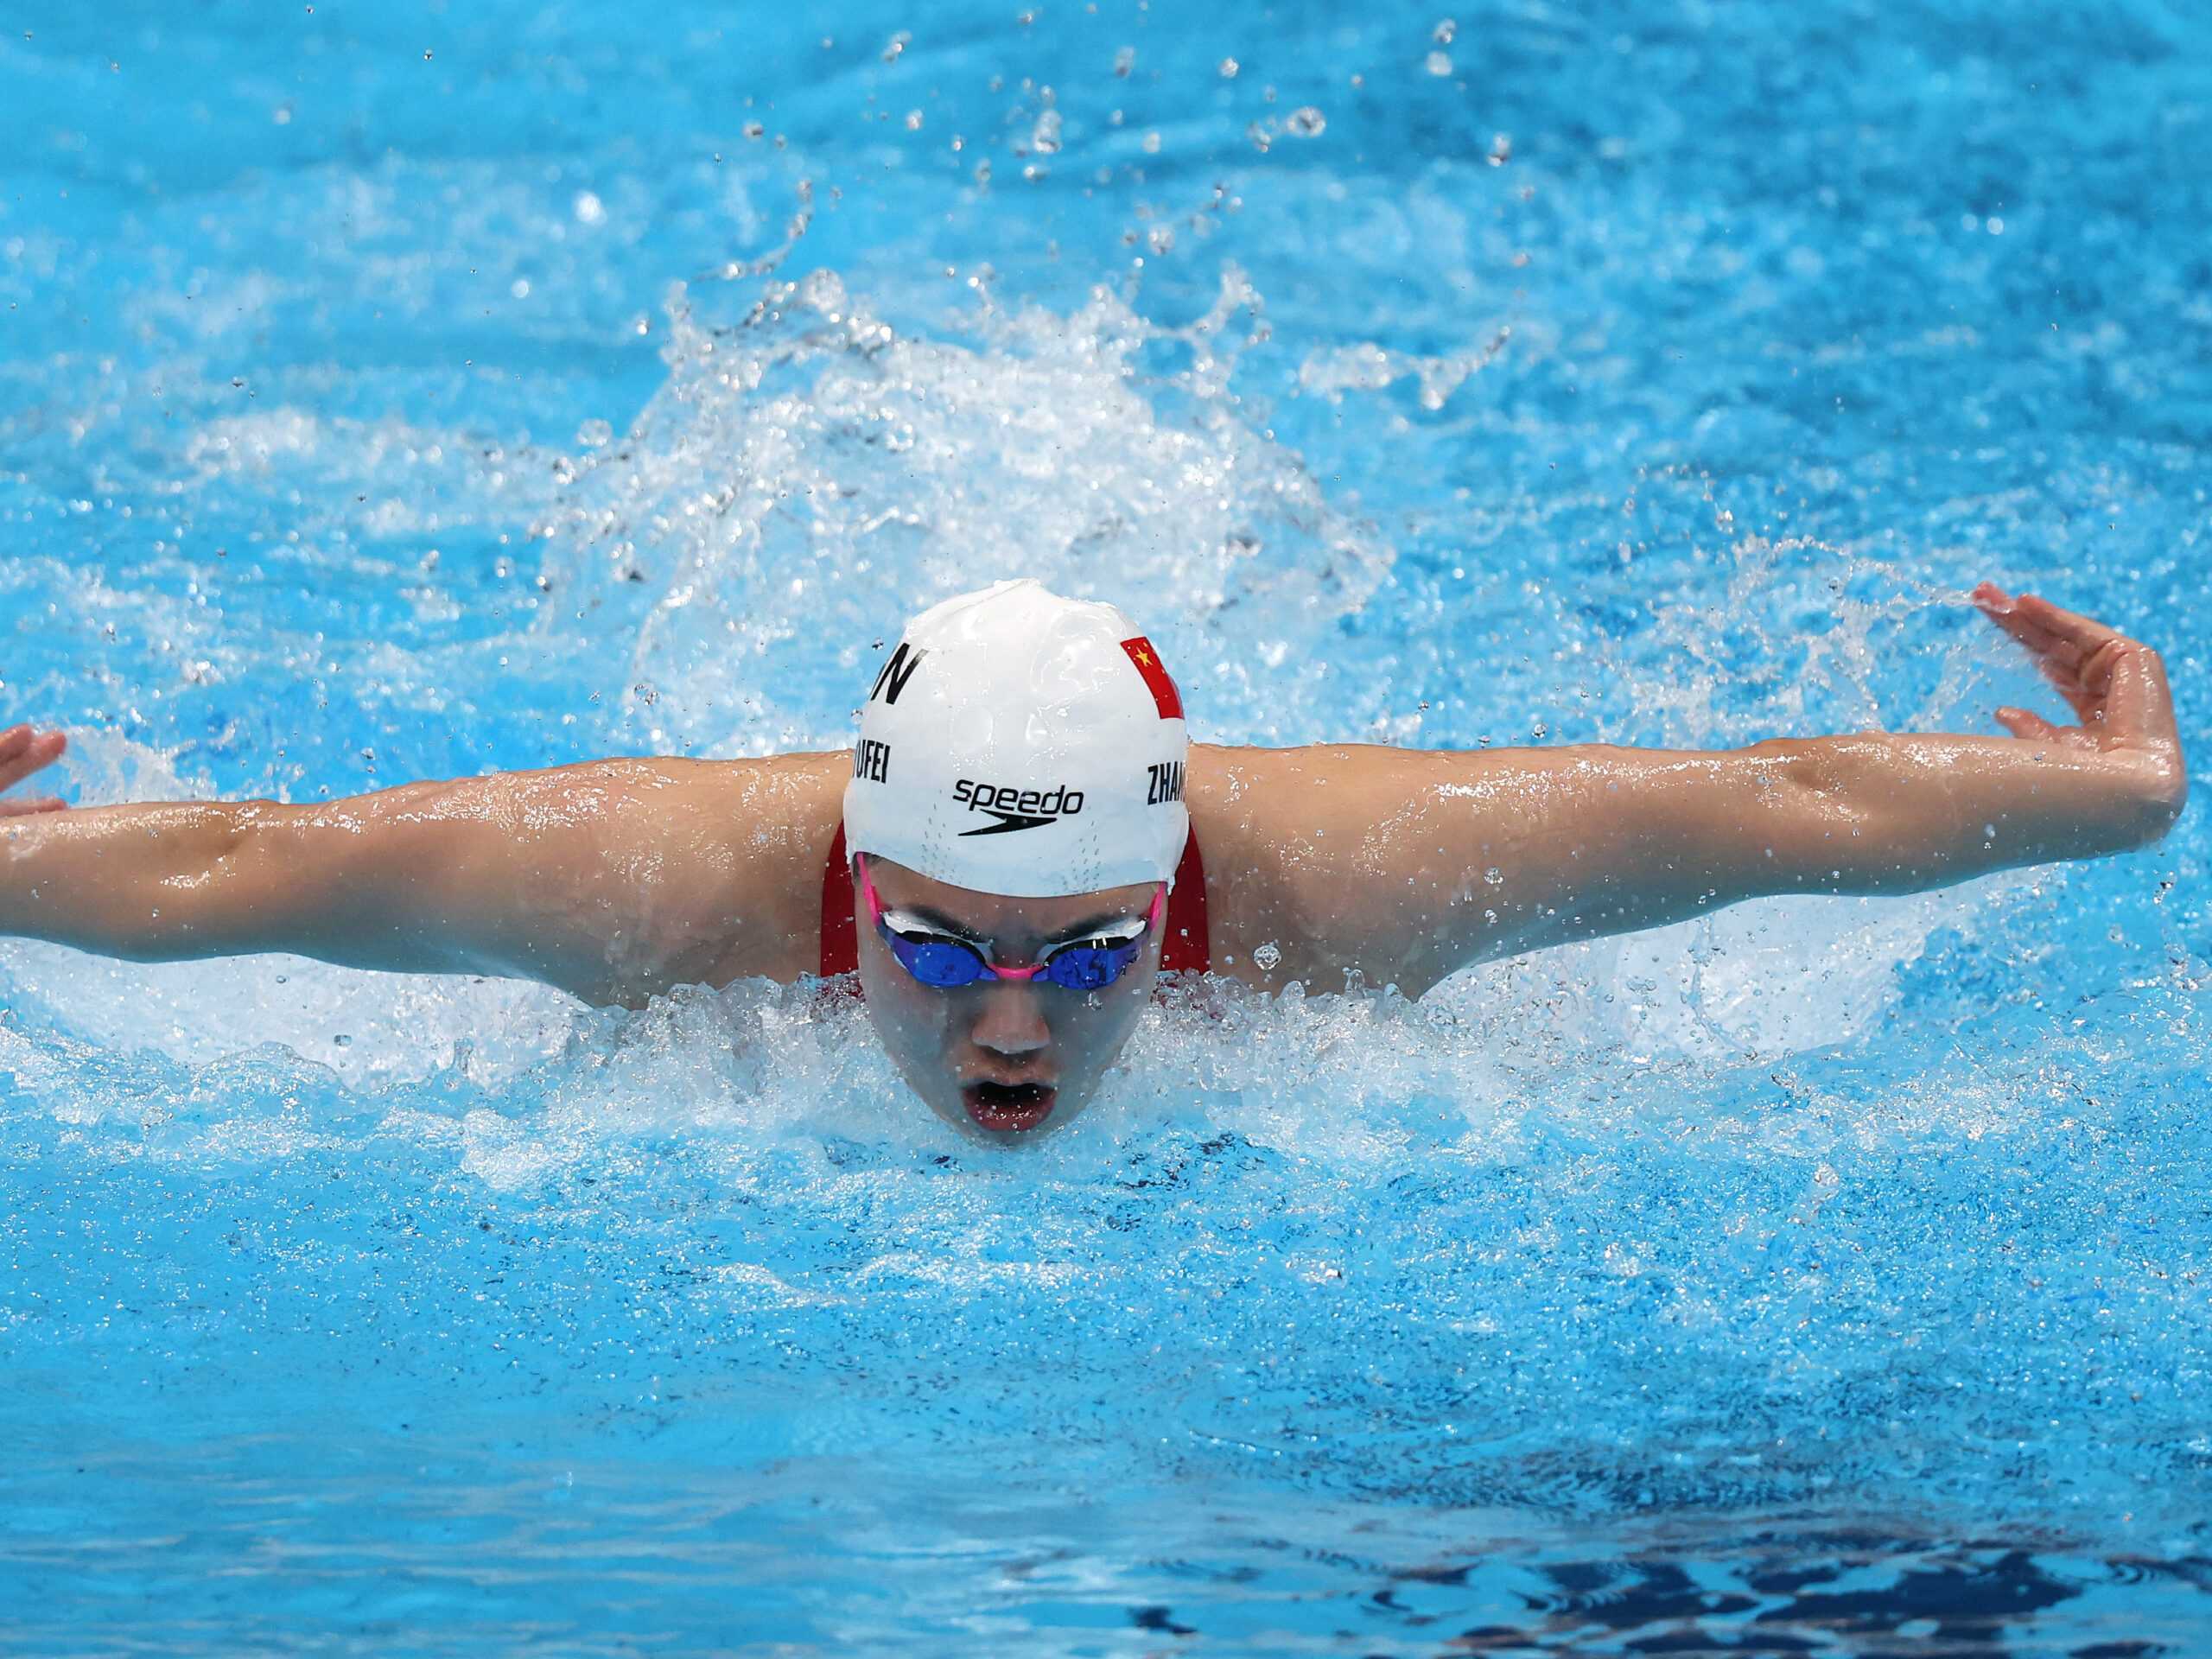 Yufei Zhang of Team China competing during the Tokyo Olympics in 2021. Zhang won four medals in Tokyo including two gold and now is among 23 Chinese swimmers embroiled in a doping scandal.